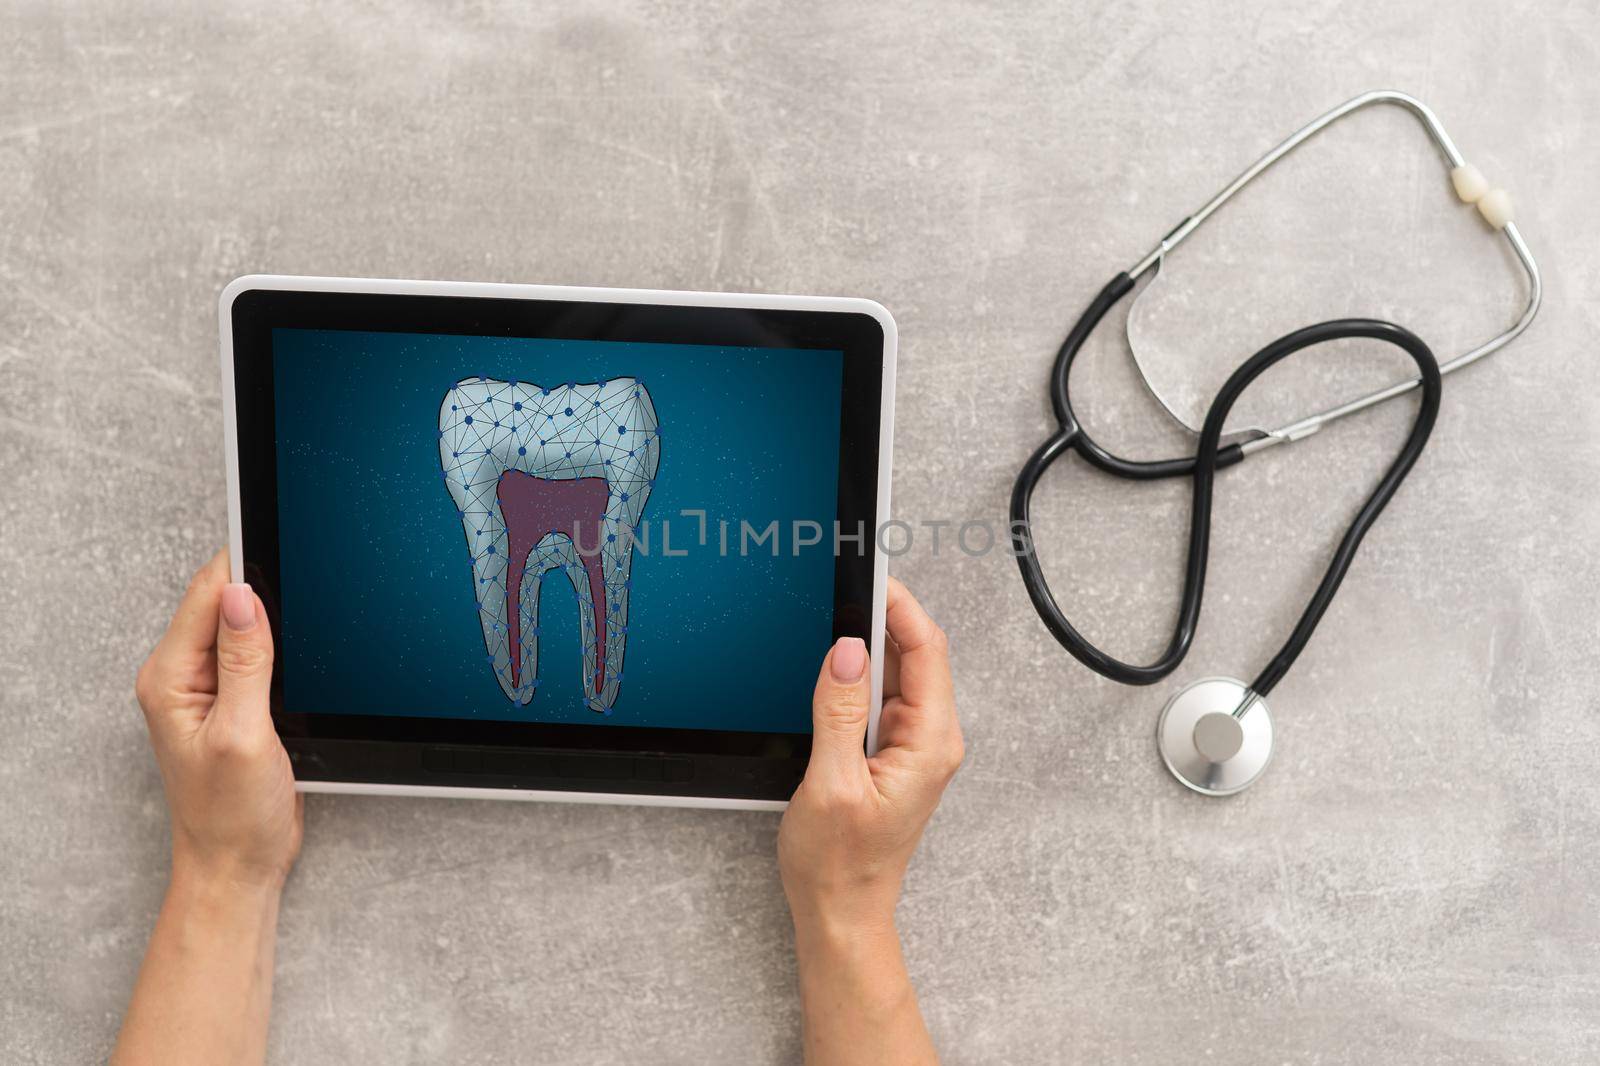 Dentist Office-Digital tablet with a patients x-rays by Andelov13